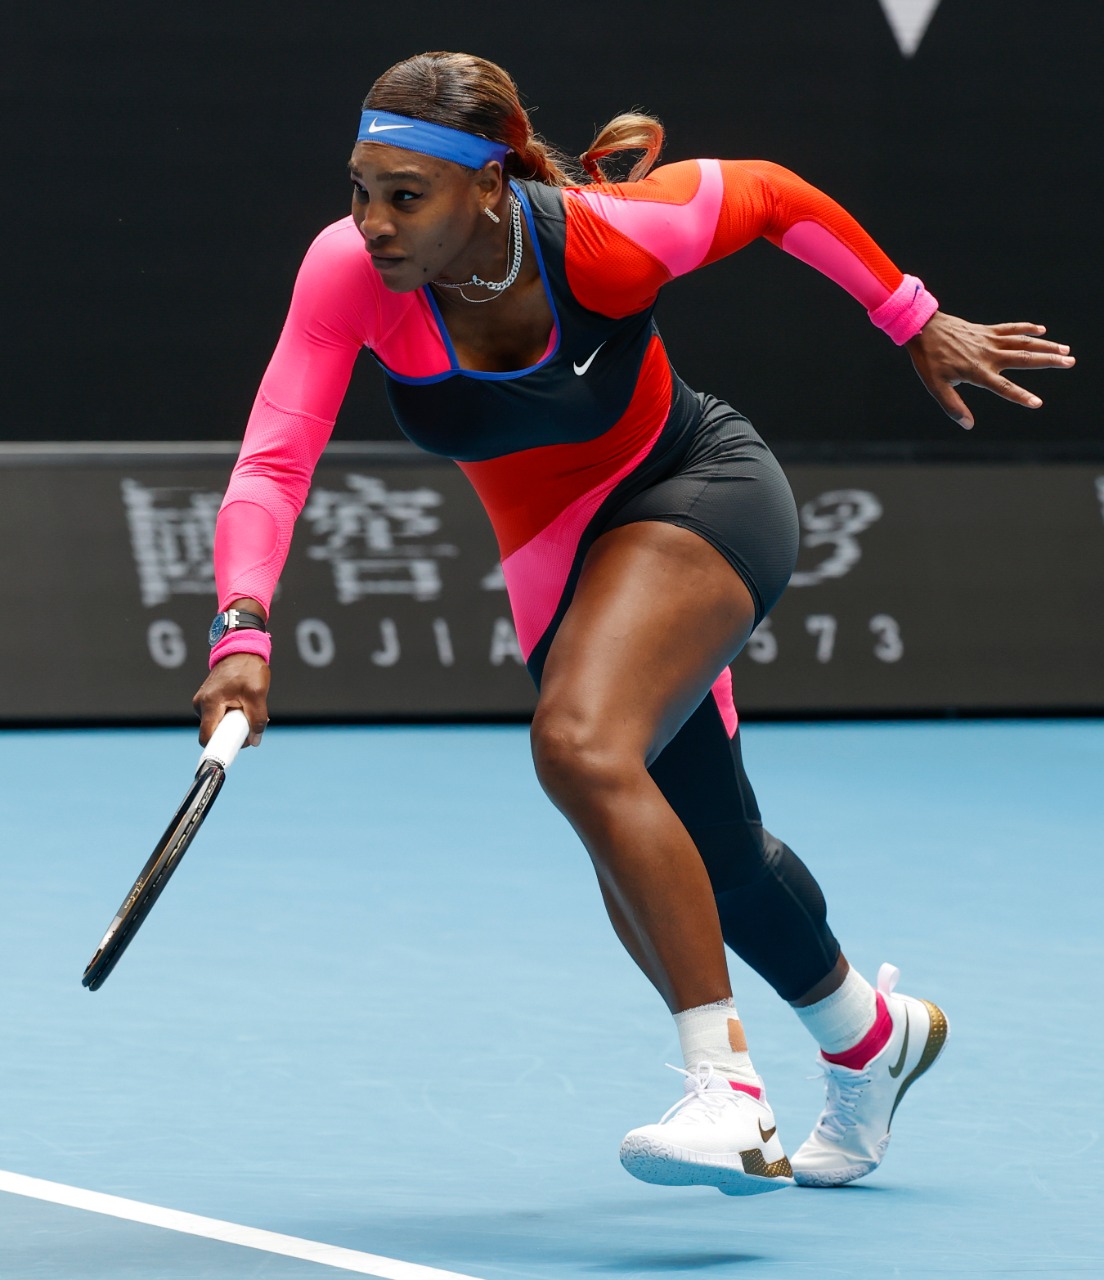 Serena Williams woos Australian Open crowd with snazzy one-legged